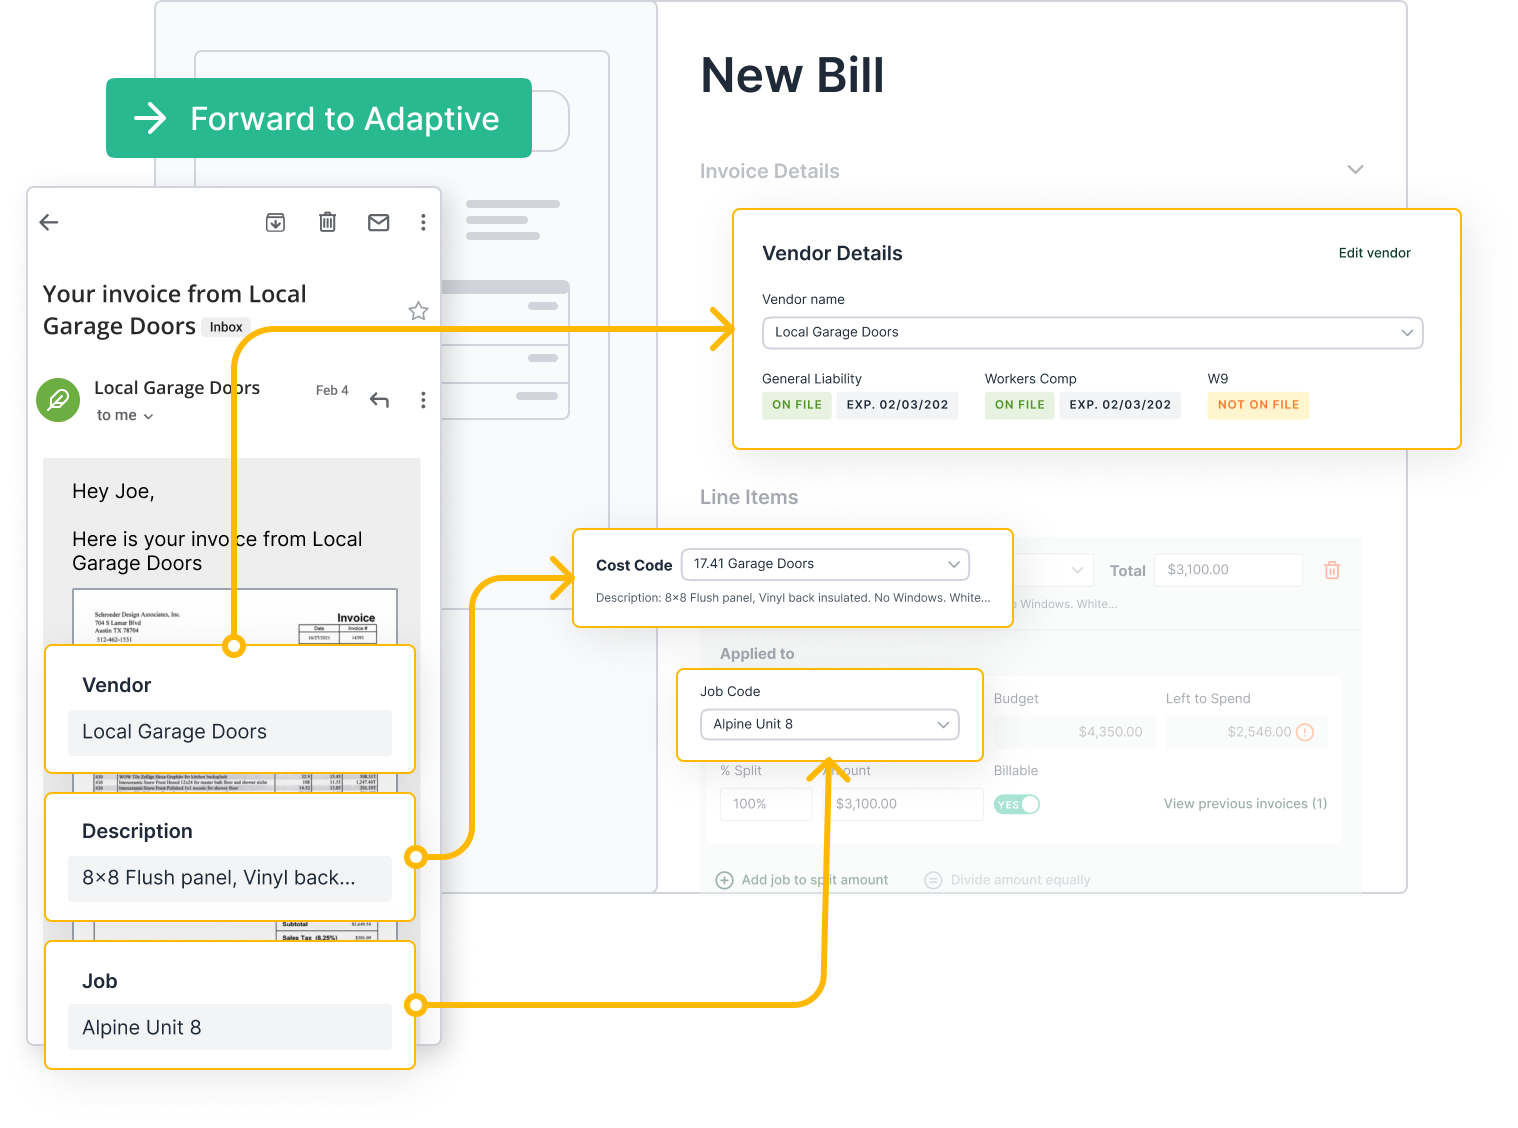 Eliminate paperwork and manual data entry with artificial intelligence. Forward, text, or scan bills and receipts to your dedicated inbox and watch as details are auto-populated and mapped to the correct job and cost code.